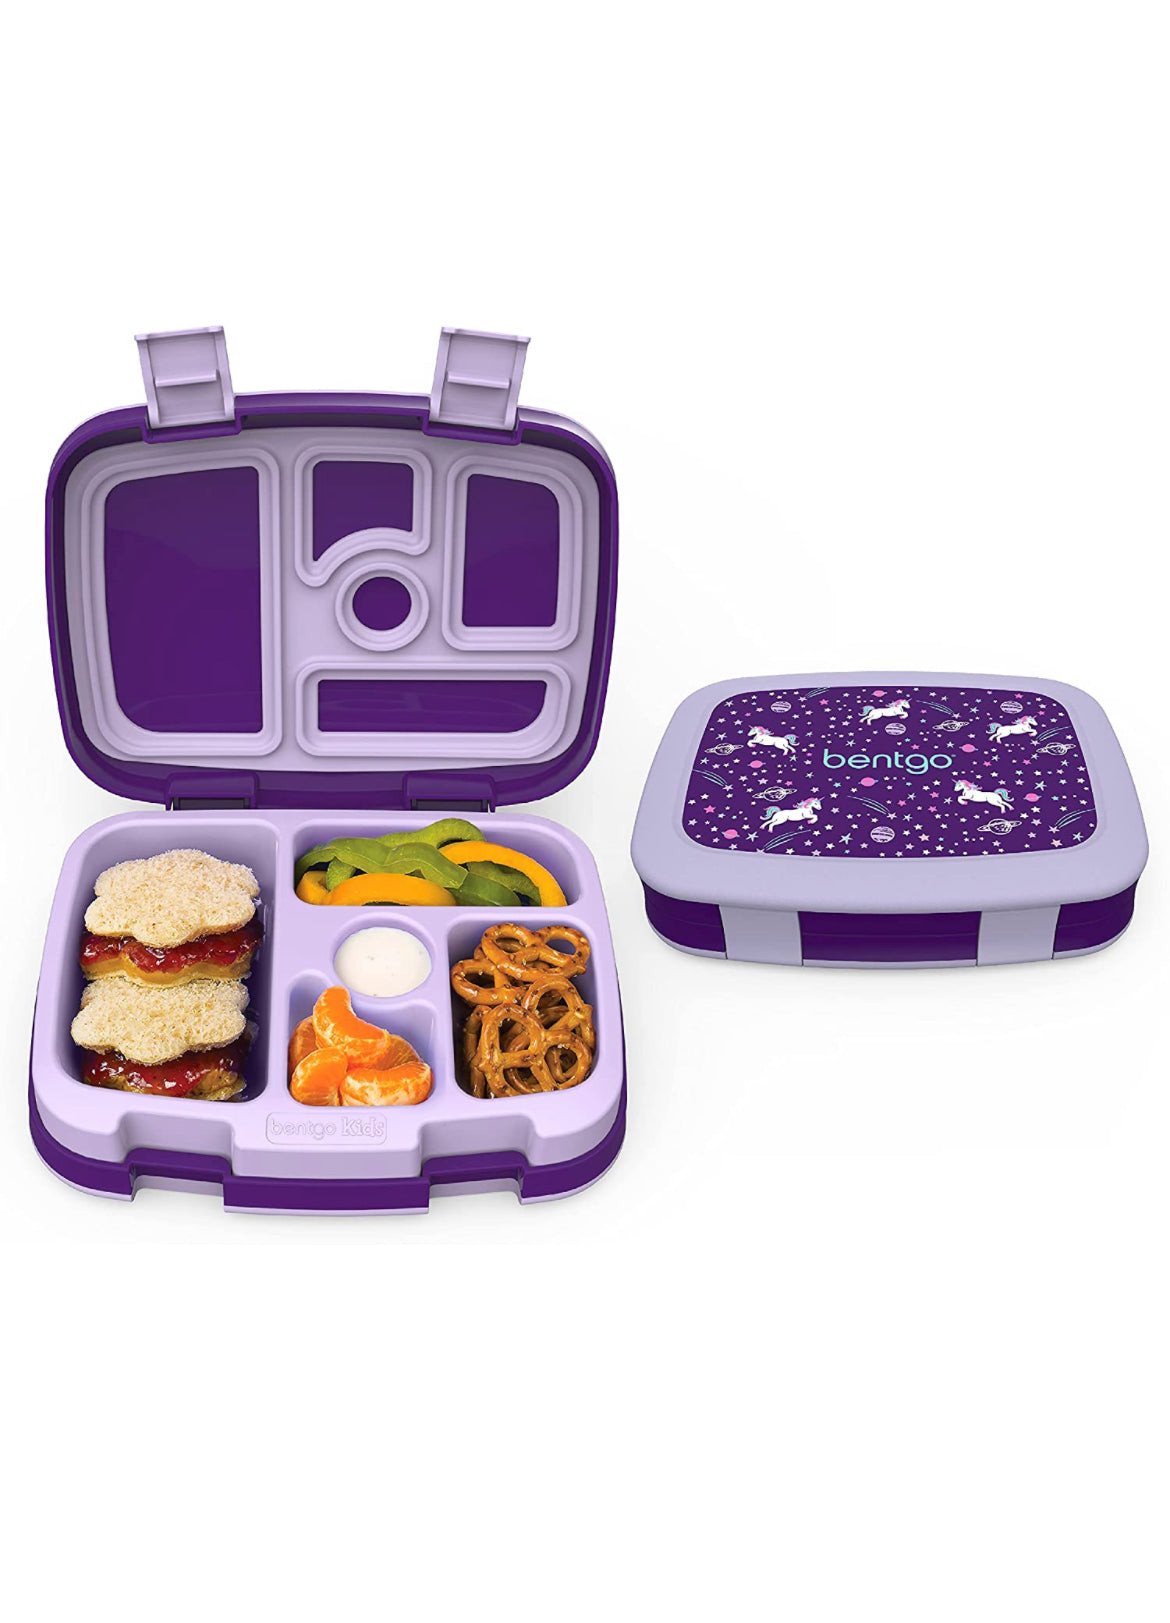 Leak-Proof, 5-Compartment Kids Lunch Box by Bentgo.